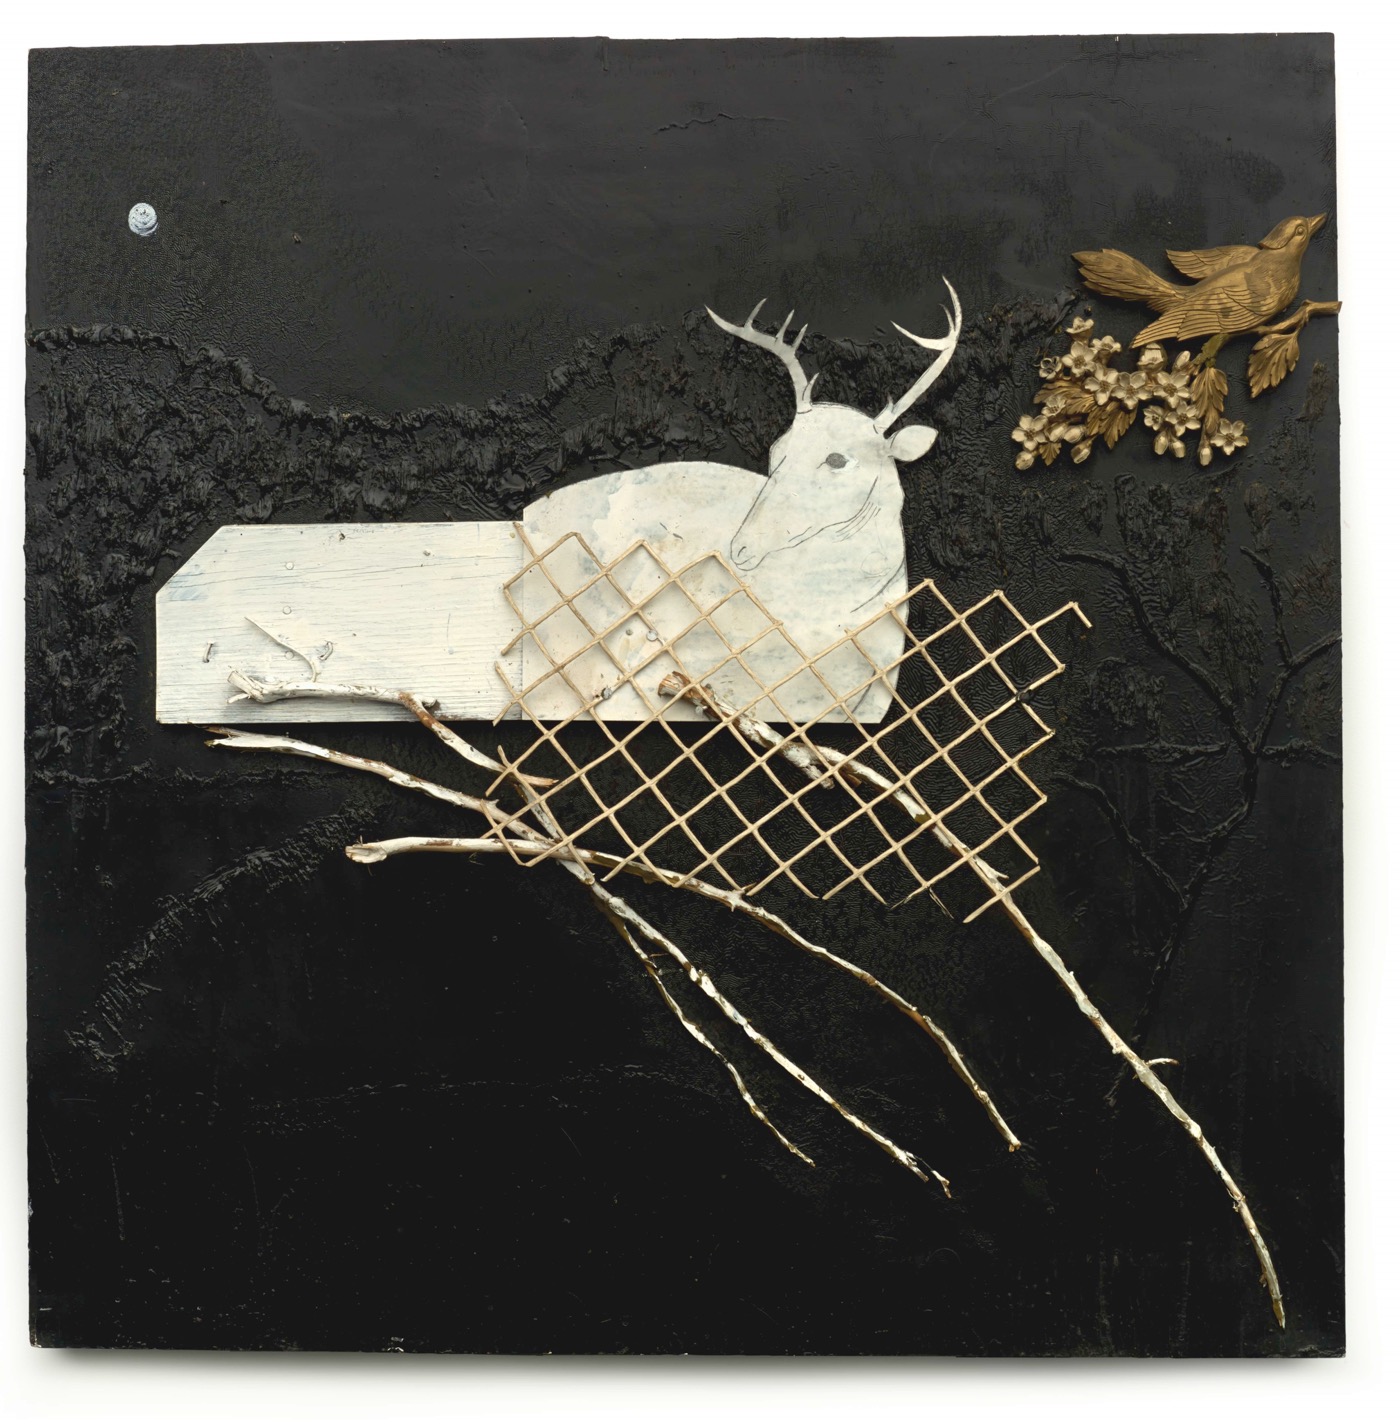 Ronald Lockett (1965–1998, Bessemer, Alabama) Traps (Golden Bird) Bessemer, Alabama 1990 Chain-link fencing, branches, cut tin, industrial sealing compound, and found plastic bird and berries 48 x 48 x 4" Collection of Tinwood LLC, L2015.15.15 Photo by Stephen Pitkin / Pitkin Studio